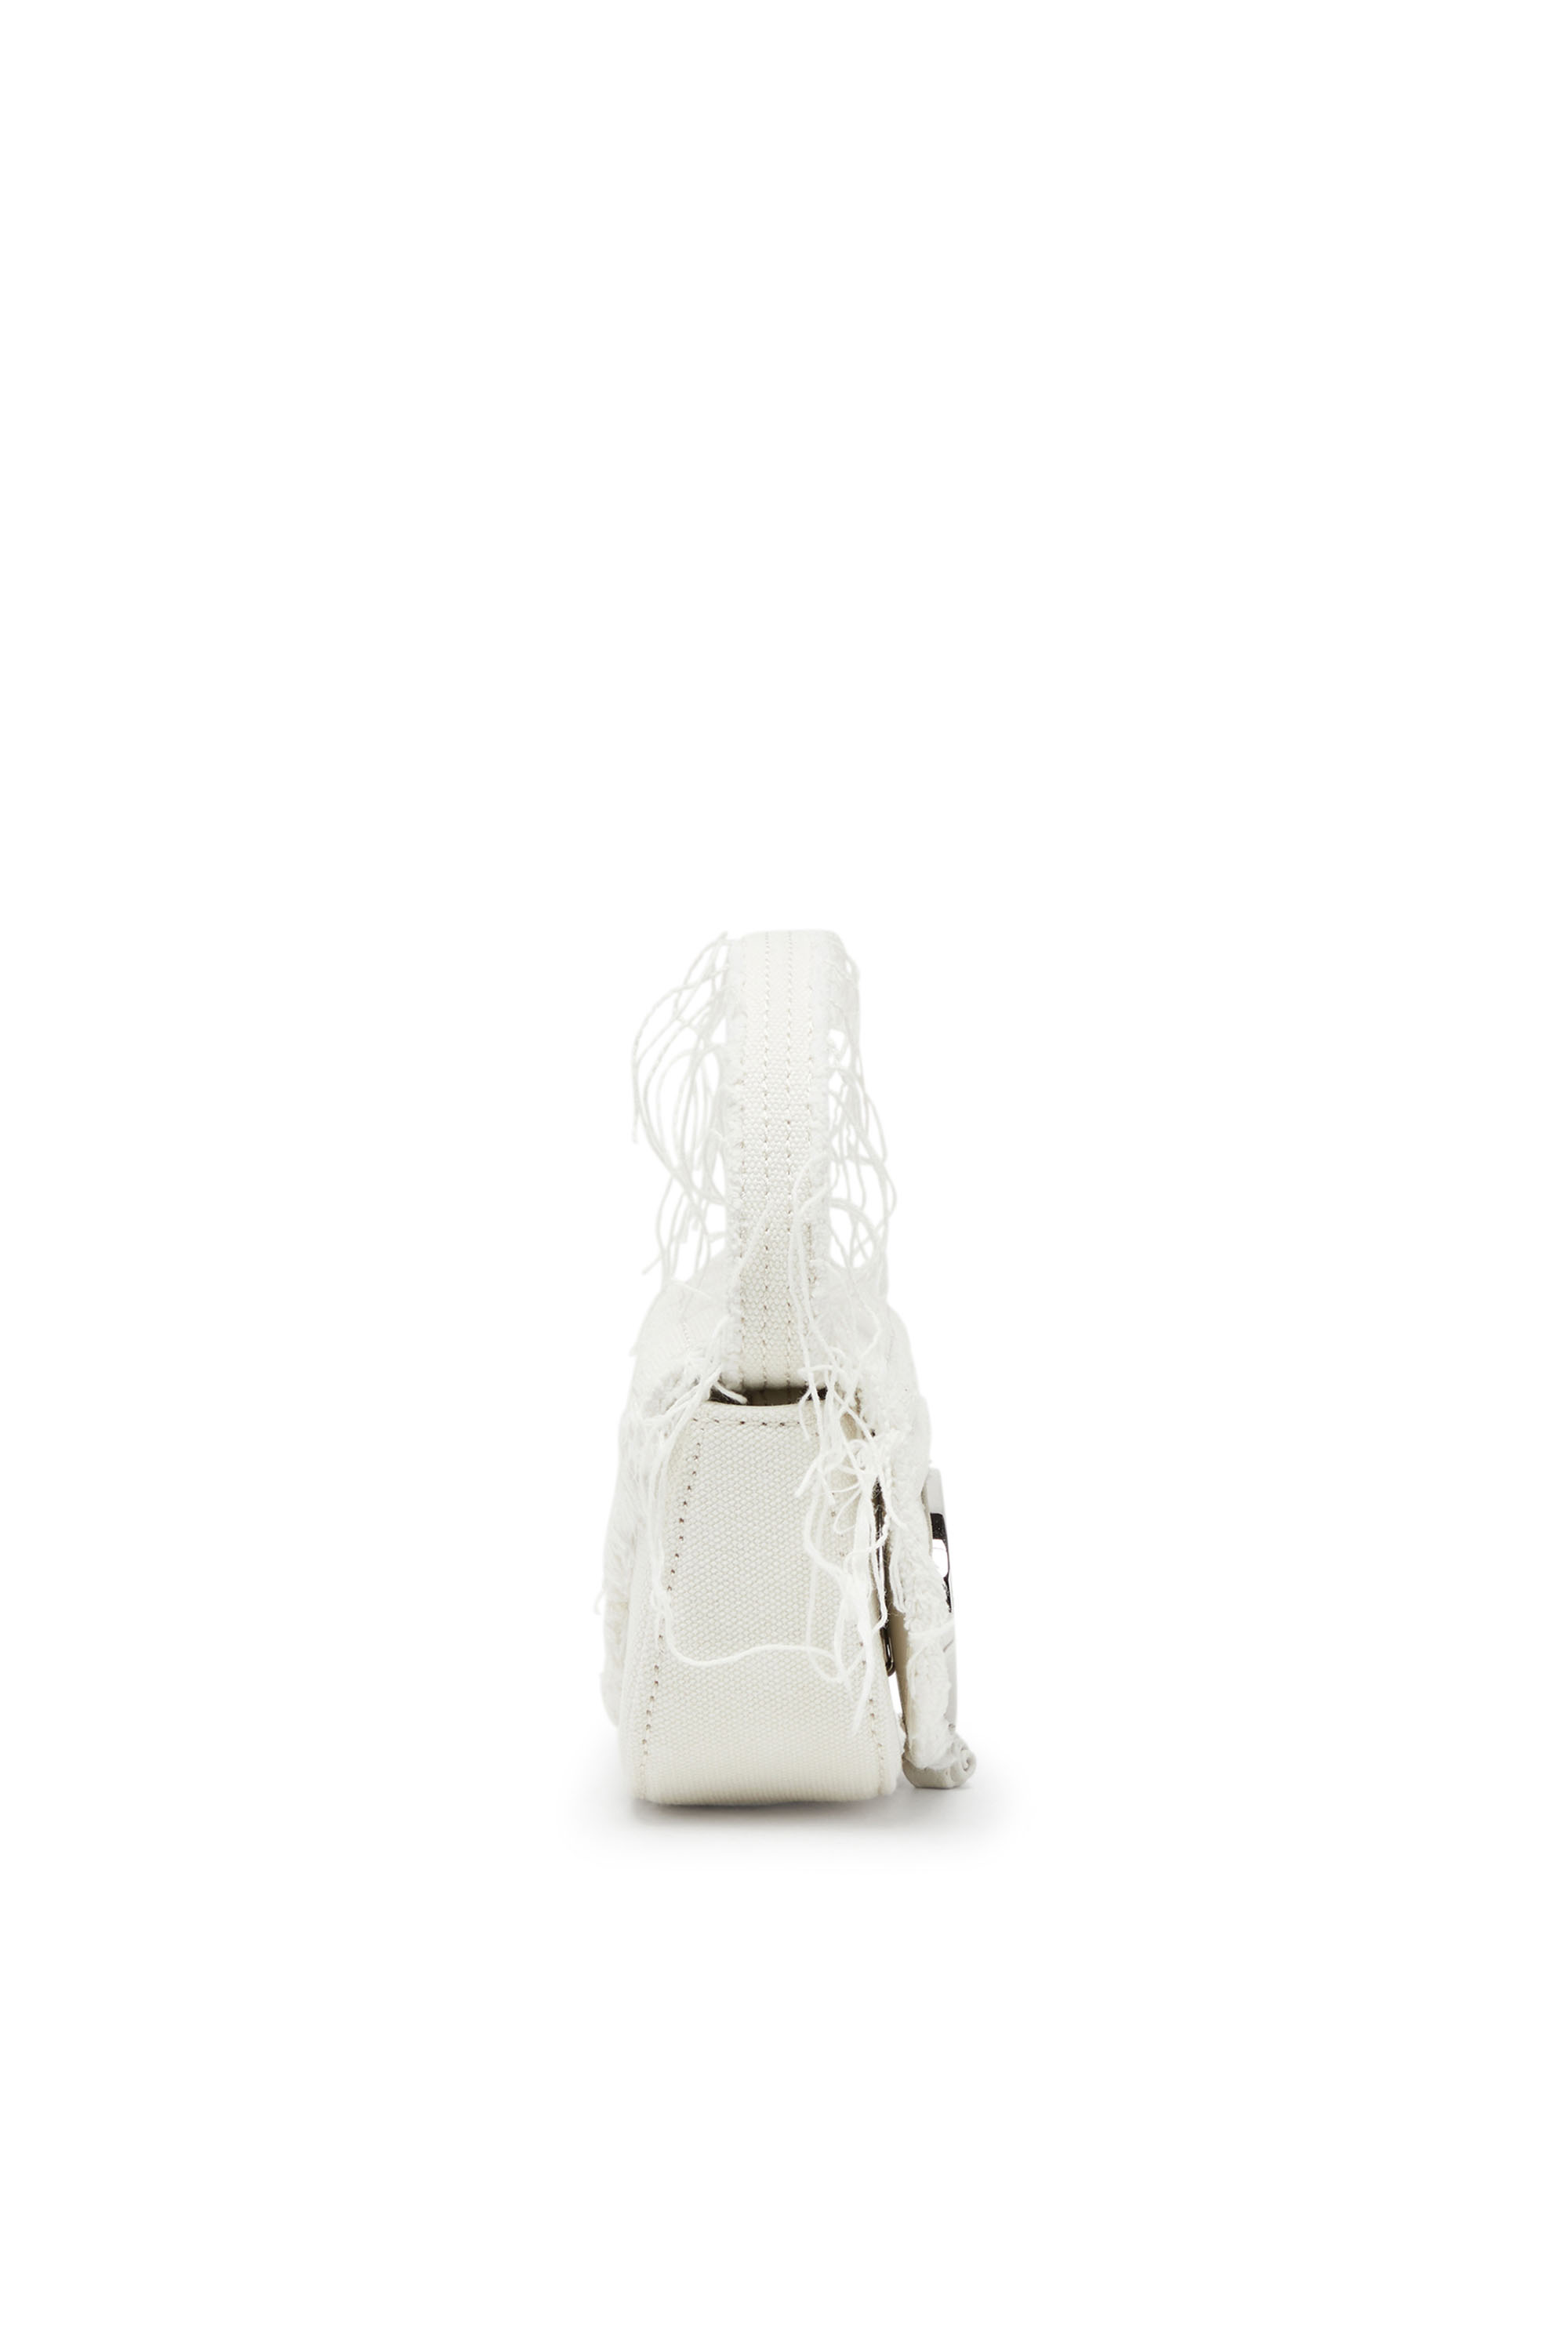 Diesel - 1DR XS, Donna 1DR XS-Iconica mini bag in tela e pelle in Bianco - Image 3